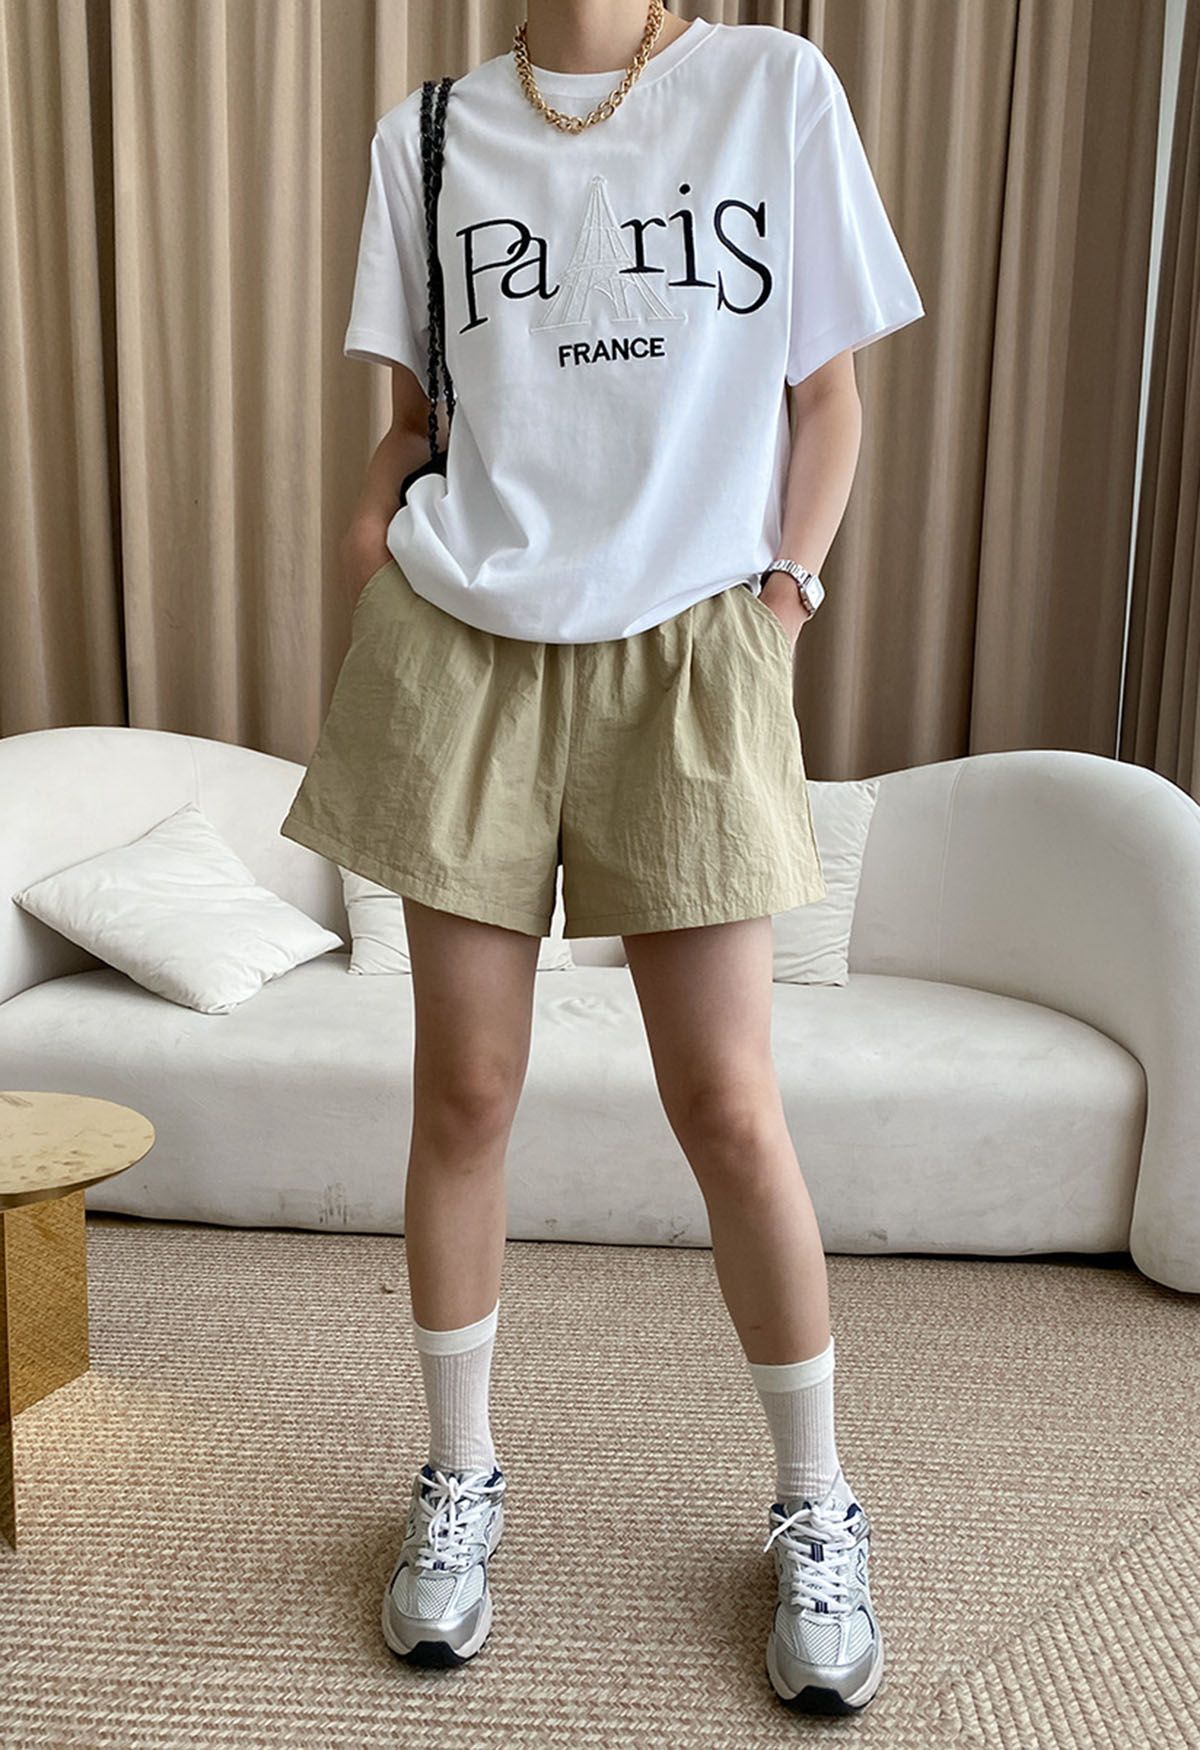 Eiffel Tower Embroidered Crew Neck T-Shirt in White